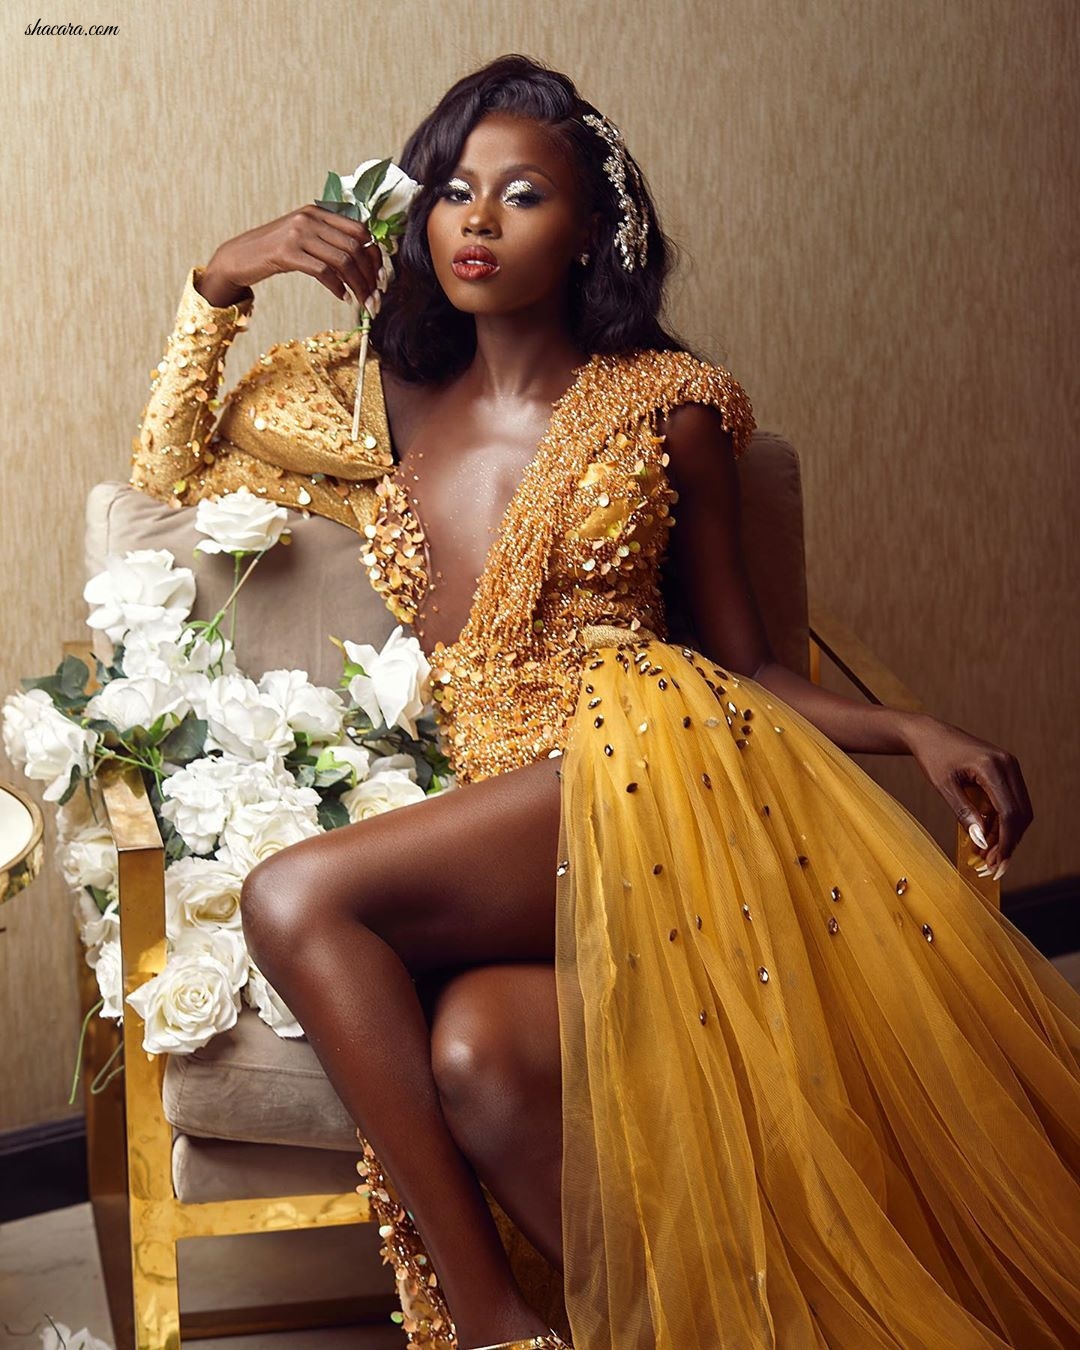 Ghanaian Designer, Sima Brew Releases A Dreamy Bridal Series, “The Utopian Collection”